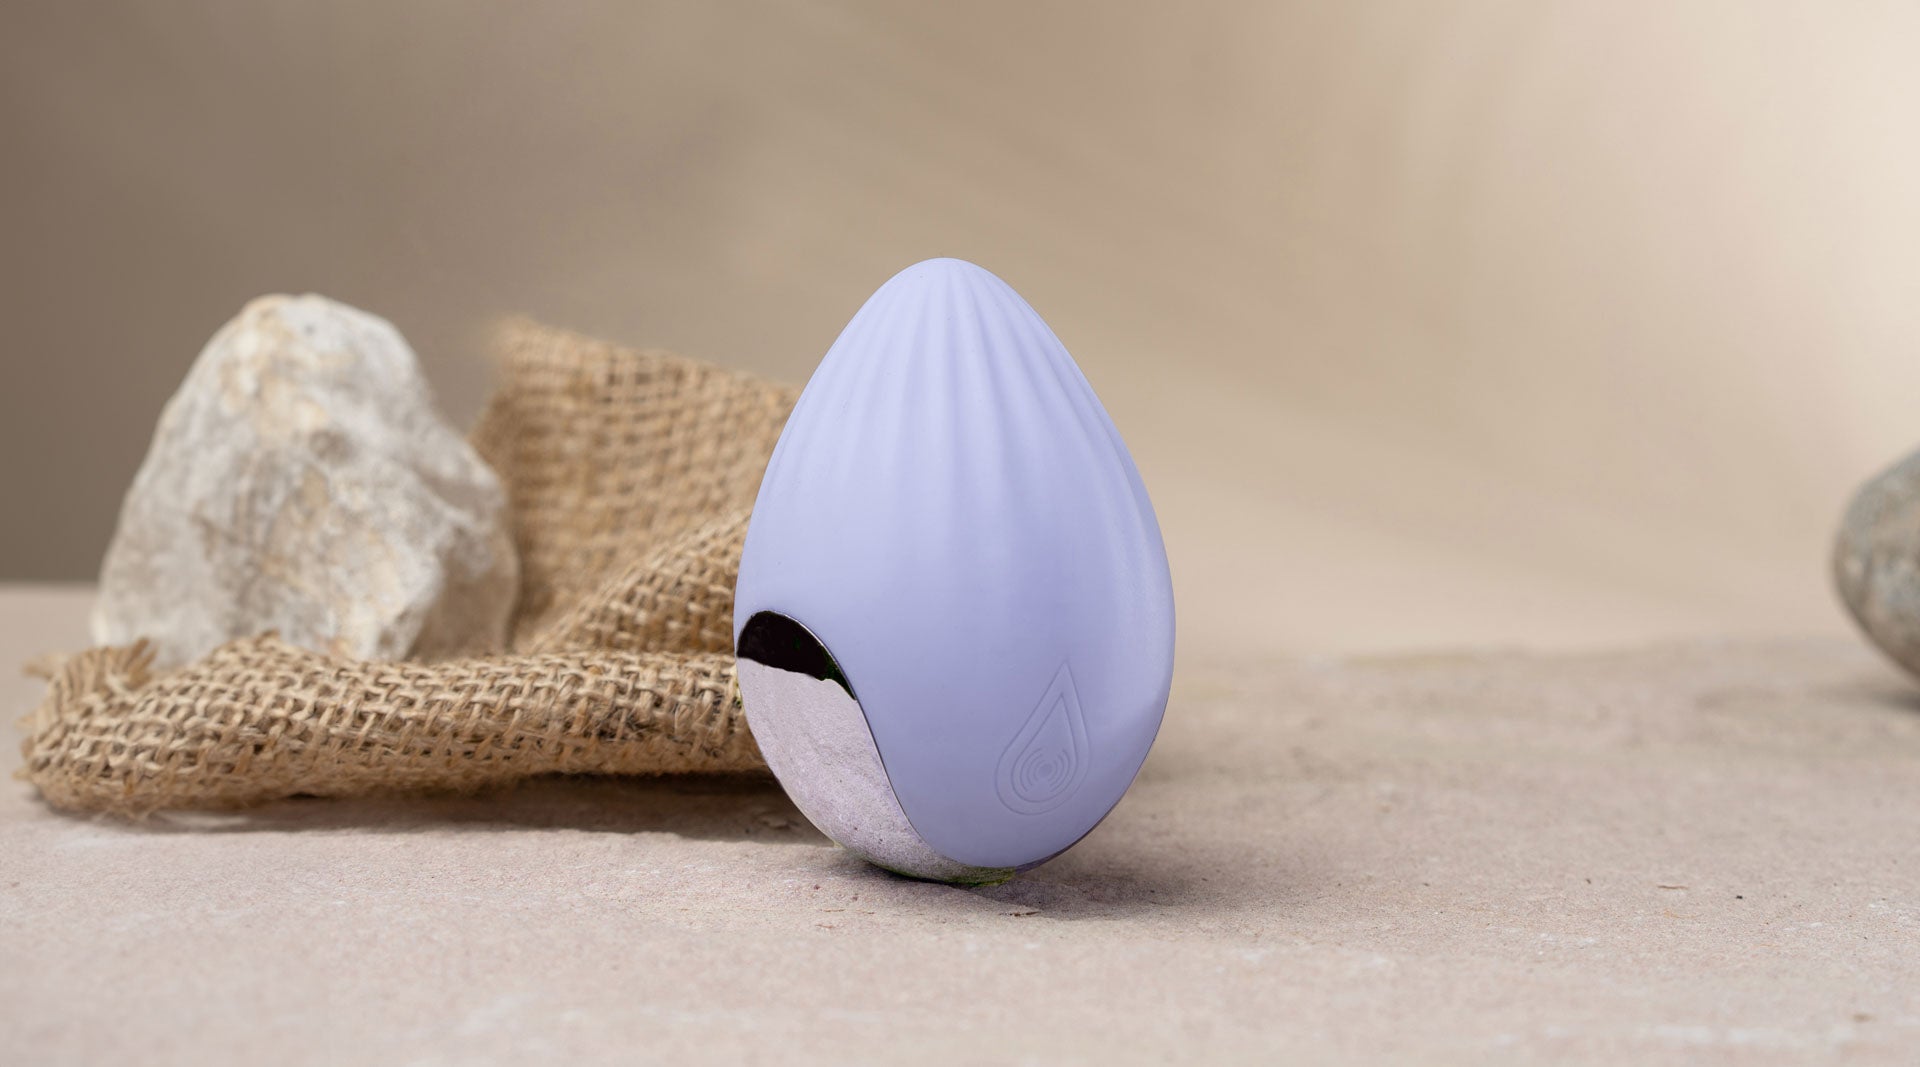 Discreet vibrating egg massager in baby blue and chrome.